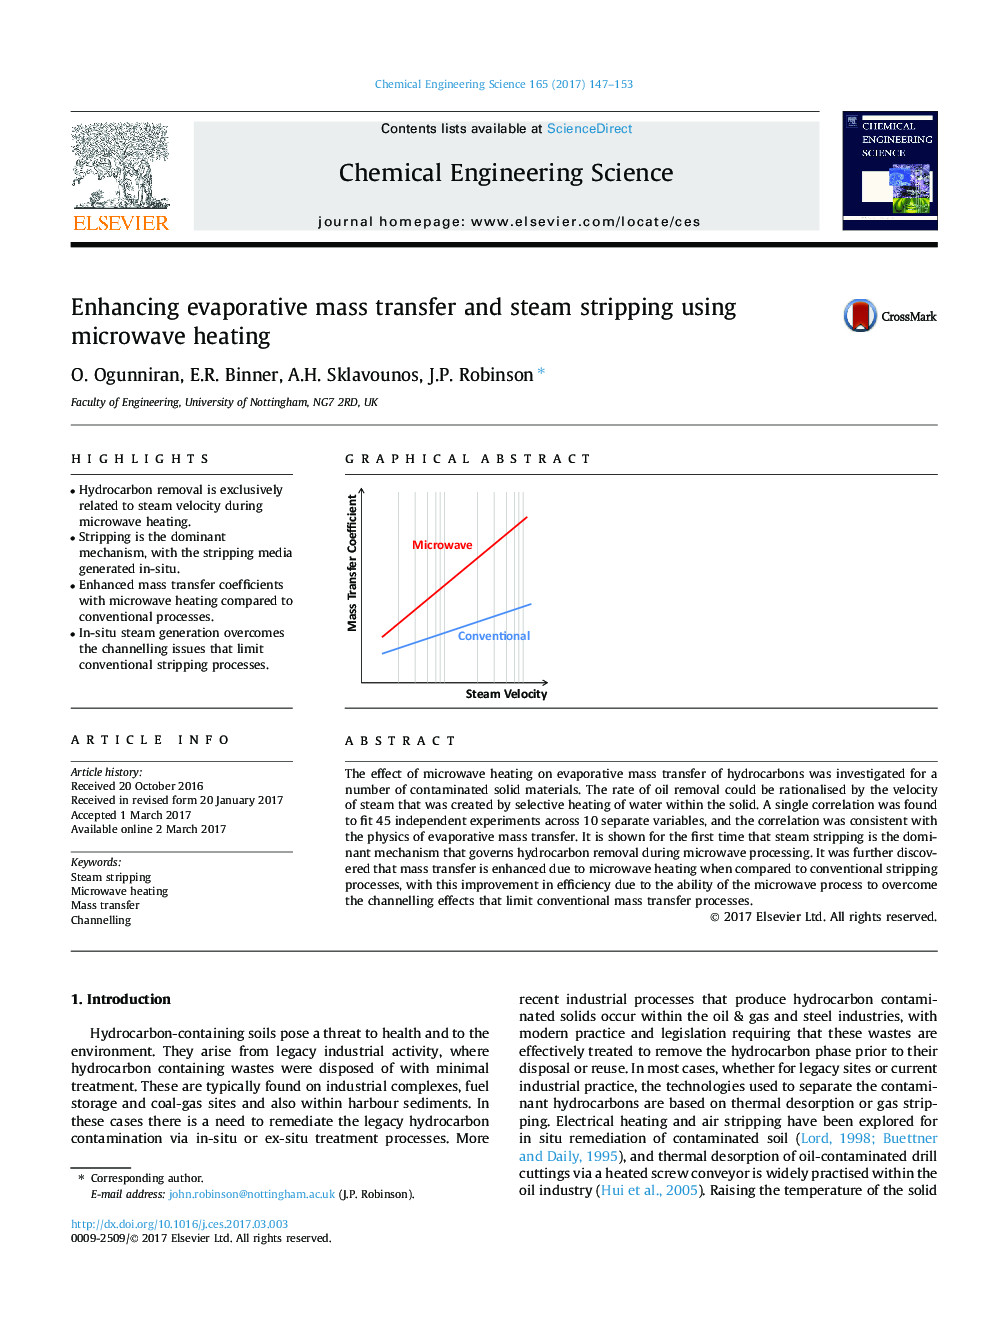 Enhancing evaporative mass transfer and steam stripping using microwave heating